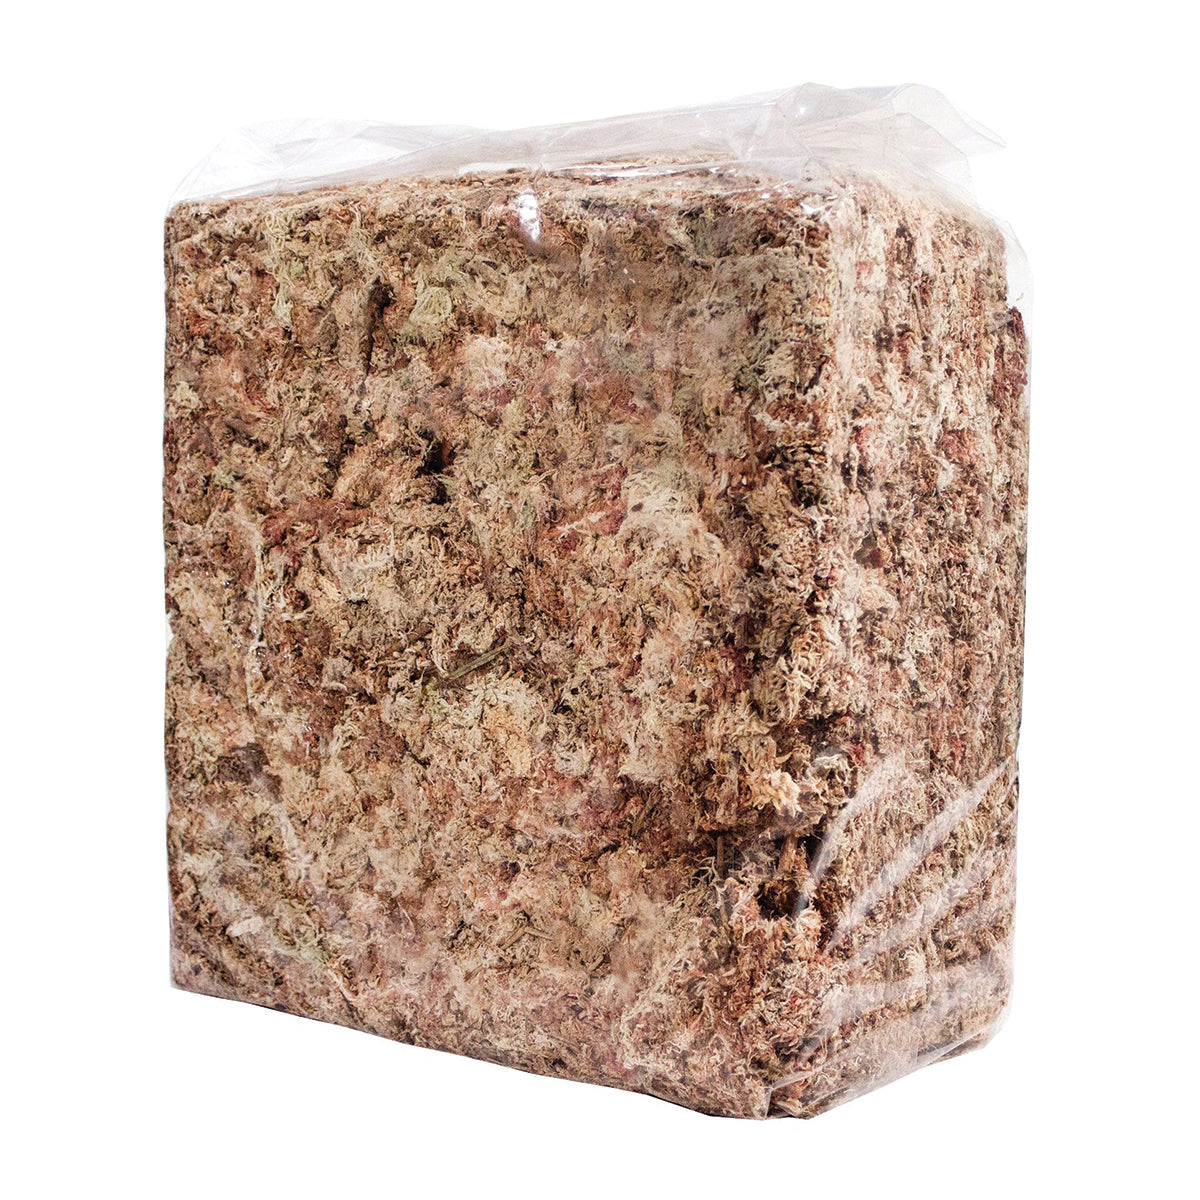 supermoss sphagnum moss natural white 2.2 lbs